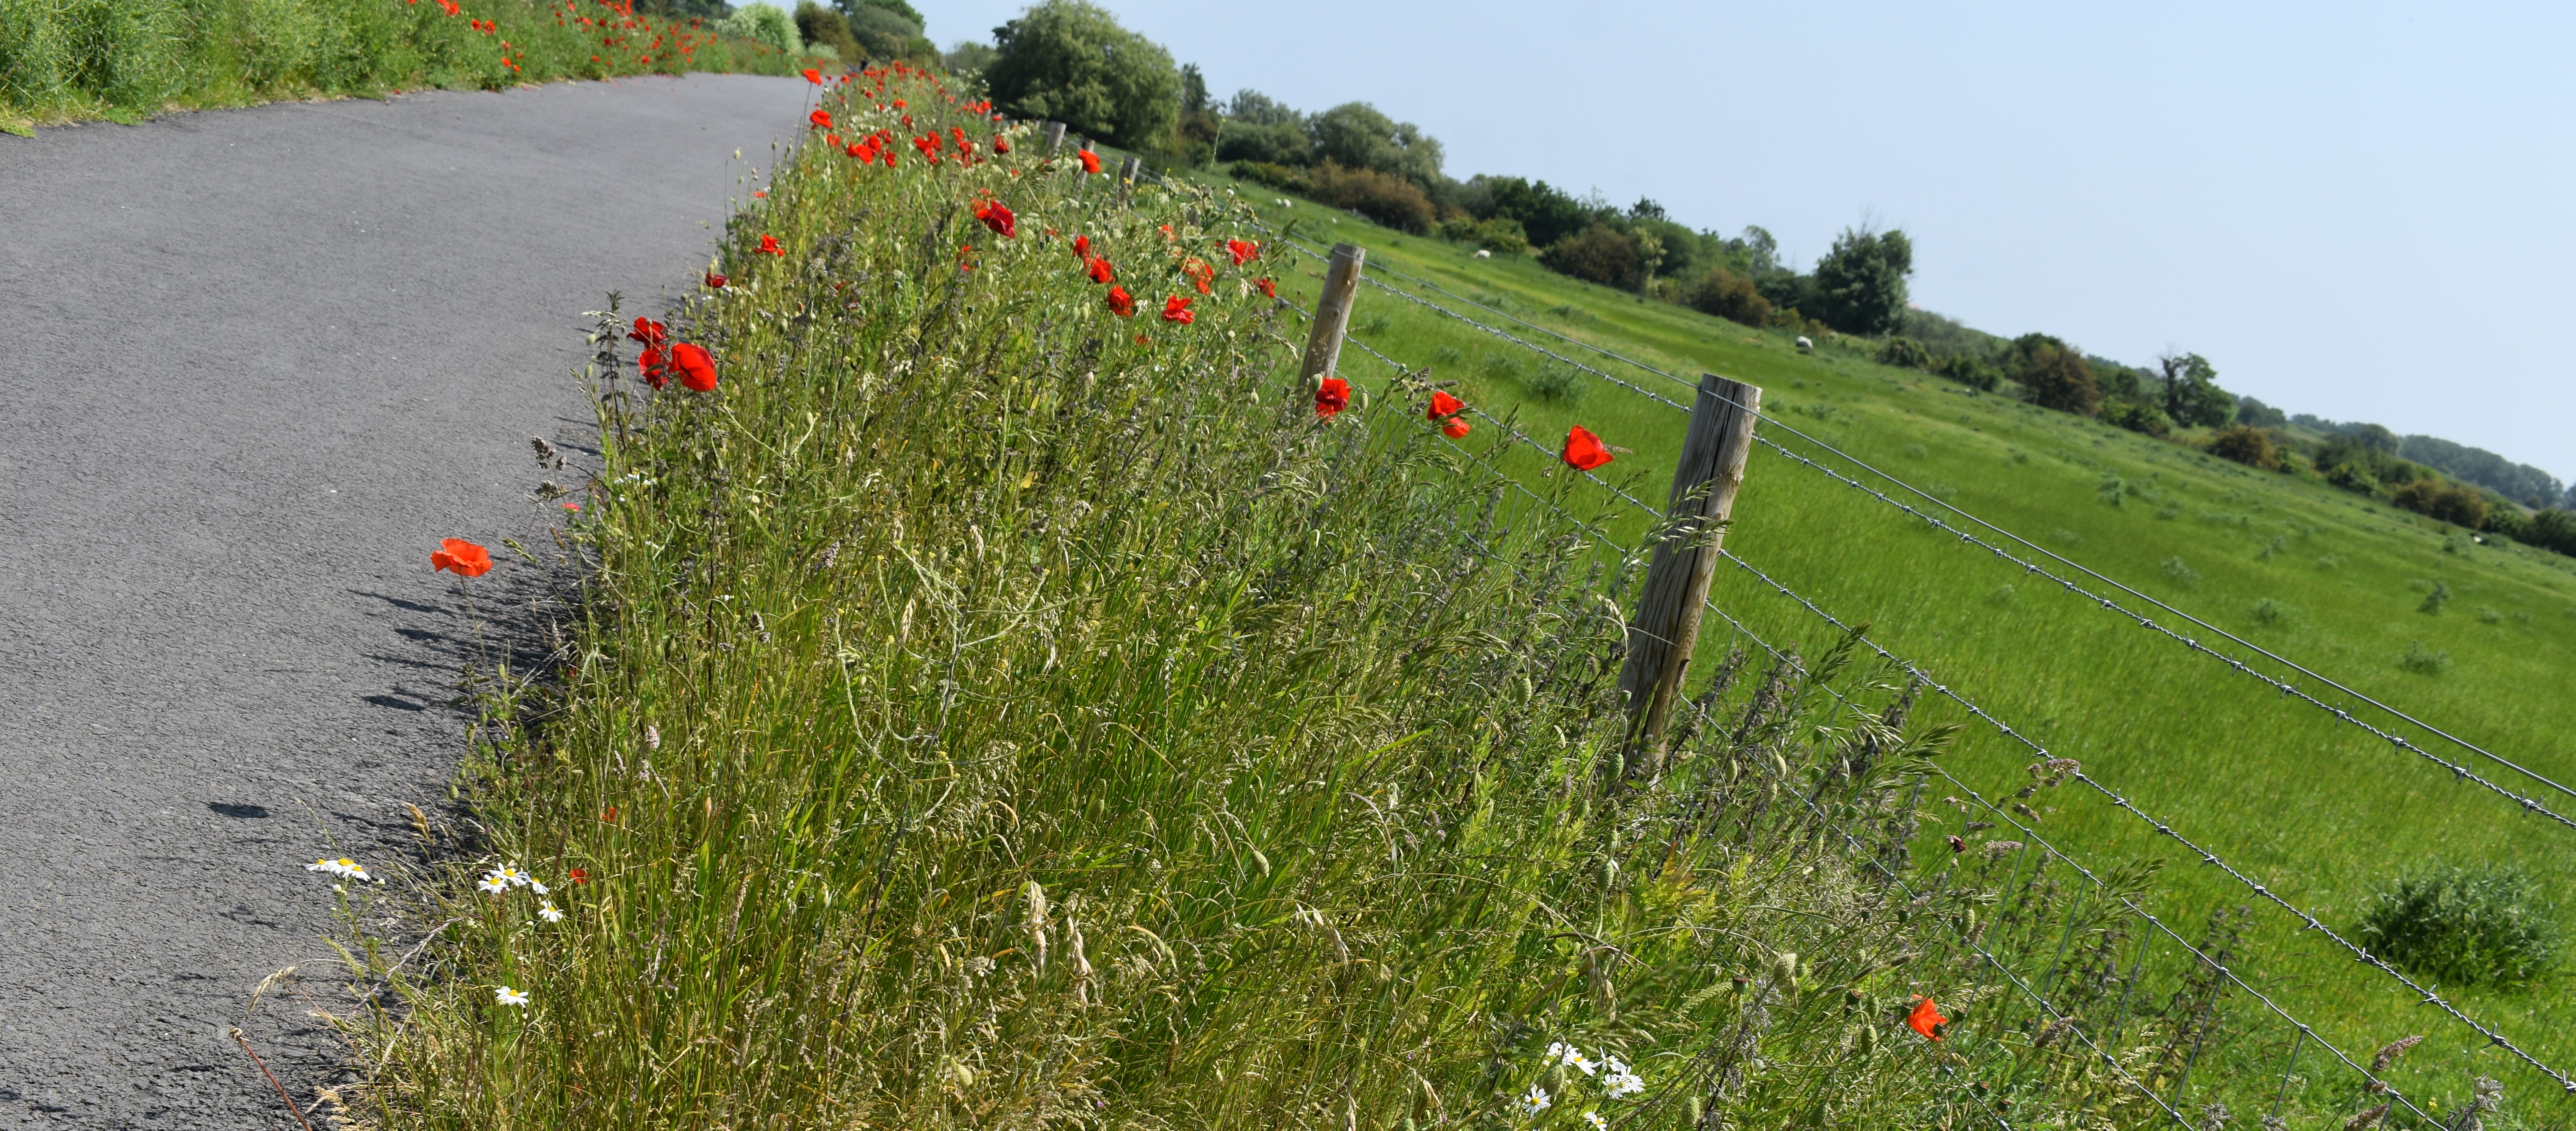 Footpath with poppies